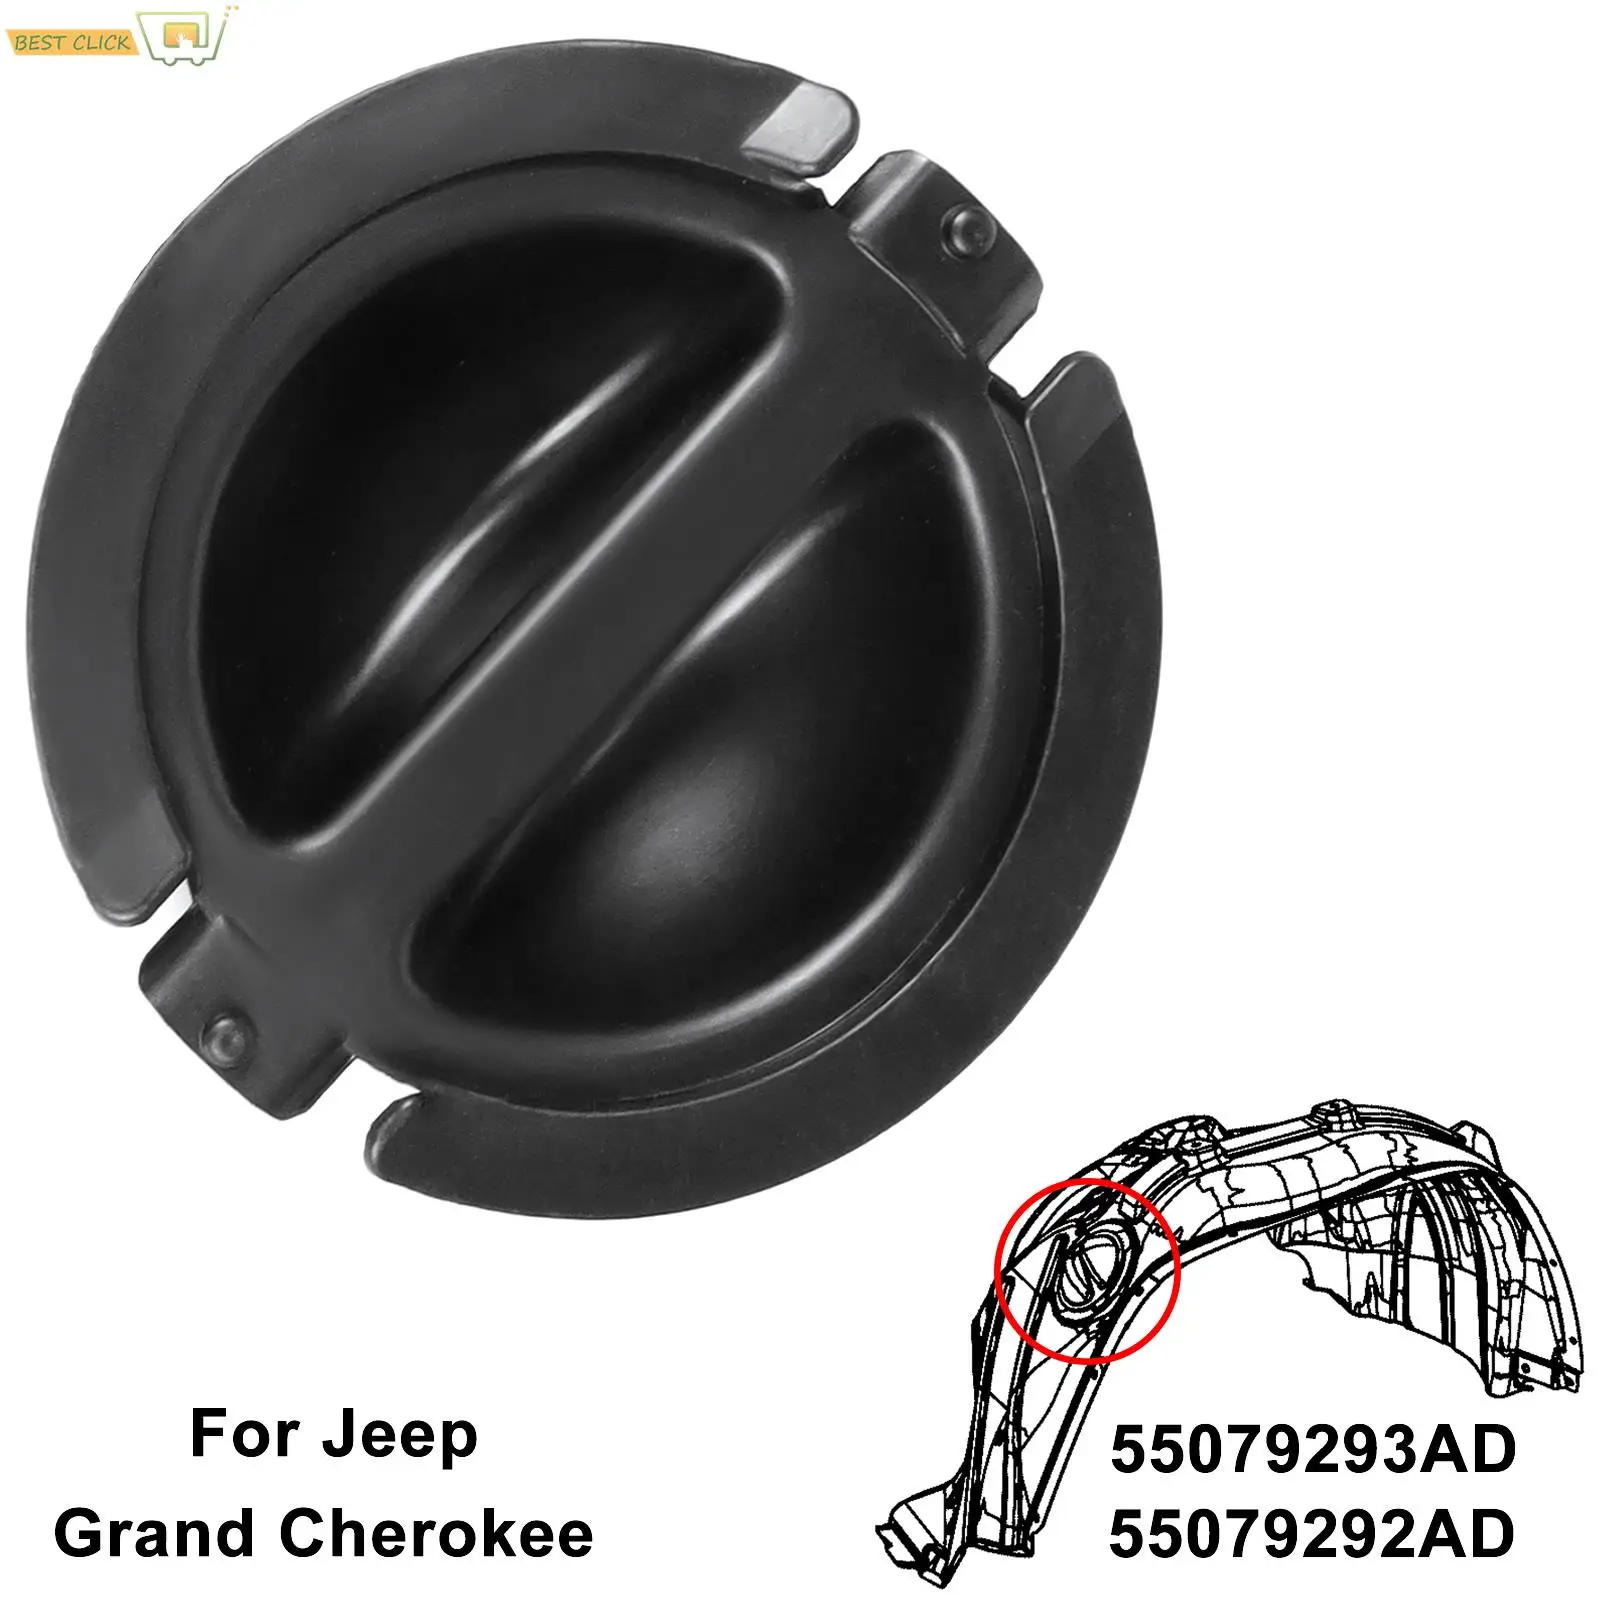 

Car Front Left Right Fender Liner Cover Caps Replacements For Jeep Grand Cherokee 2011-2017 55079292AD 55079293AD Car Accessory